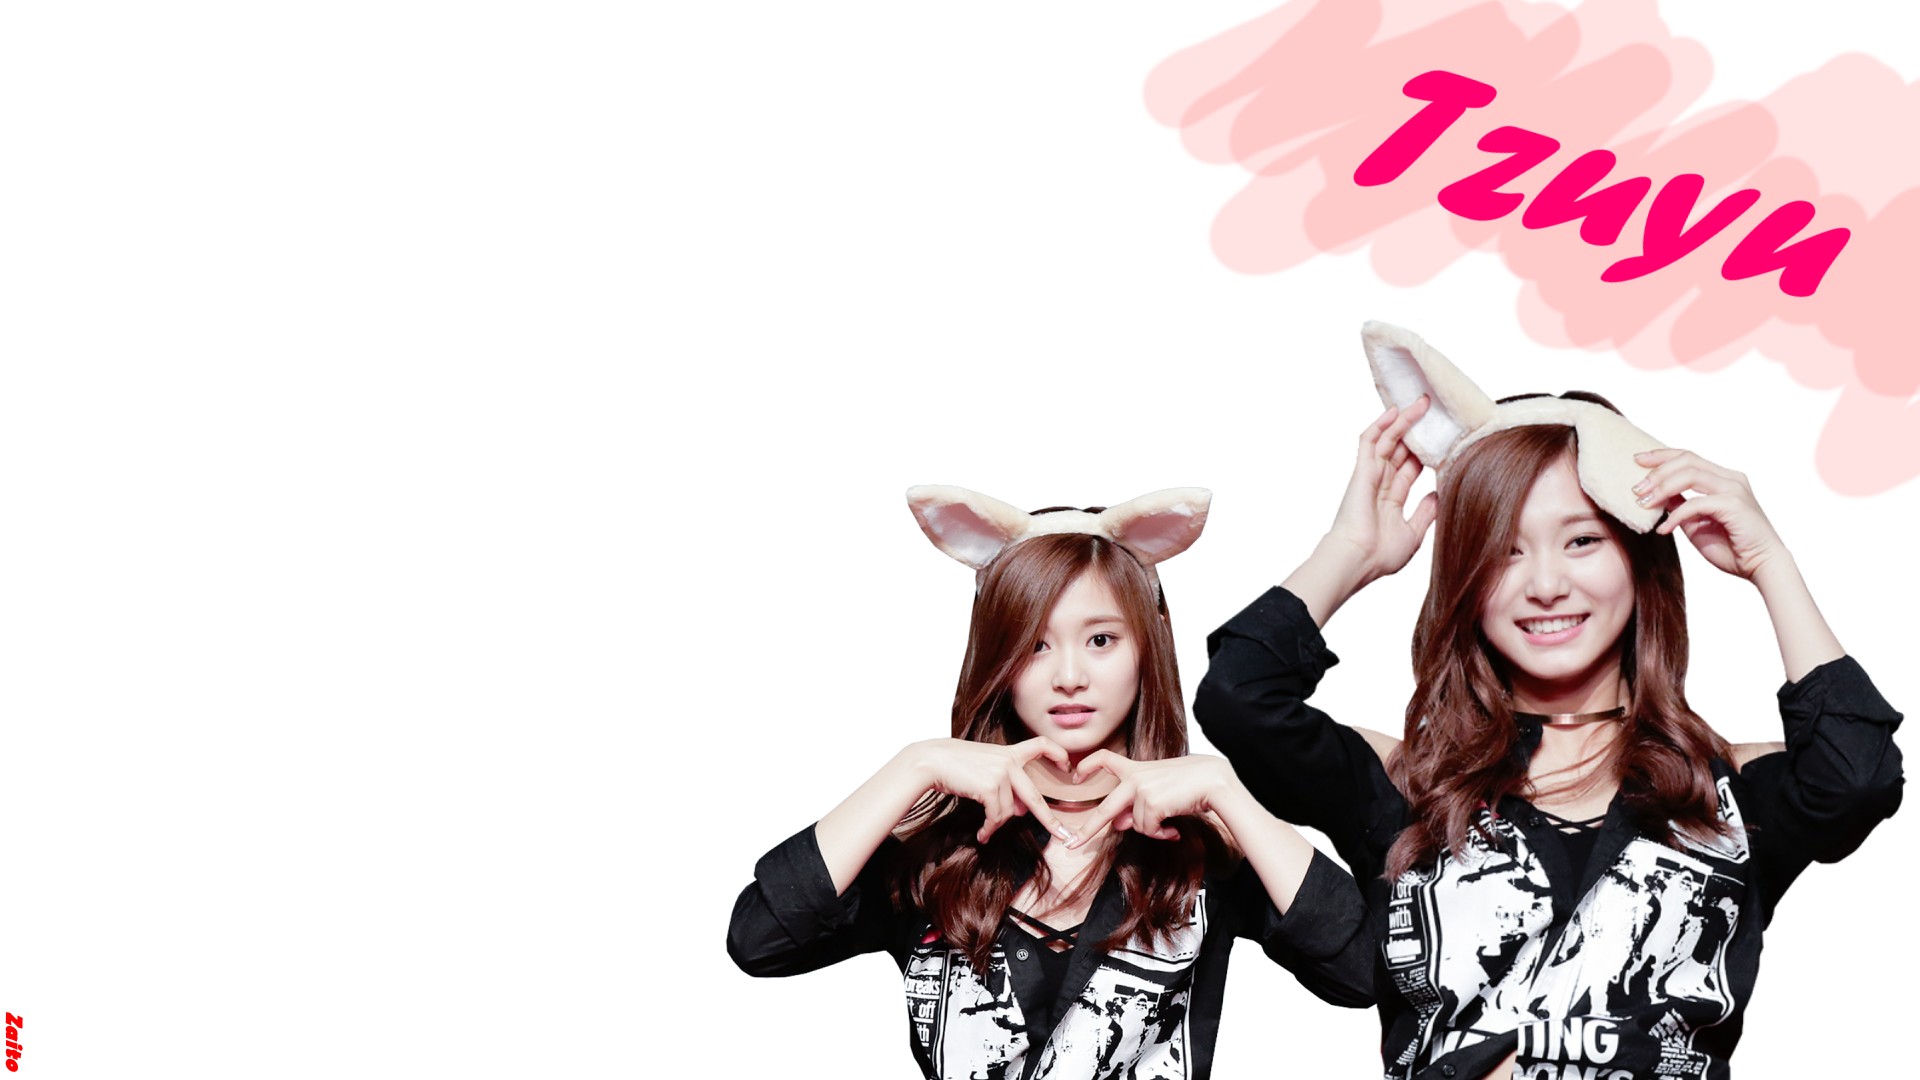 Twice wallpaper ·① Download free cool High Resolution wallpapers for desktop, mobile, laptop in ...